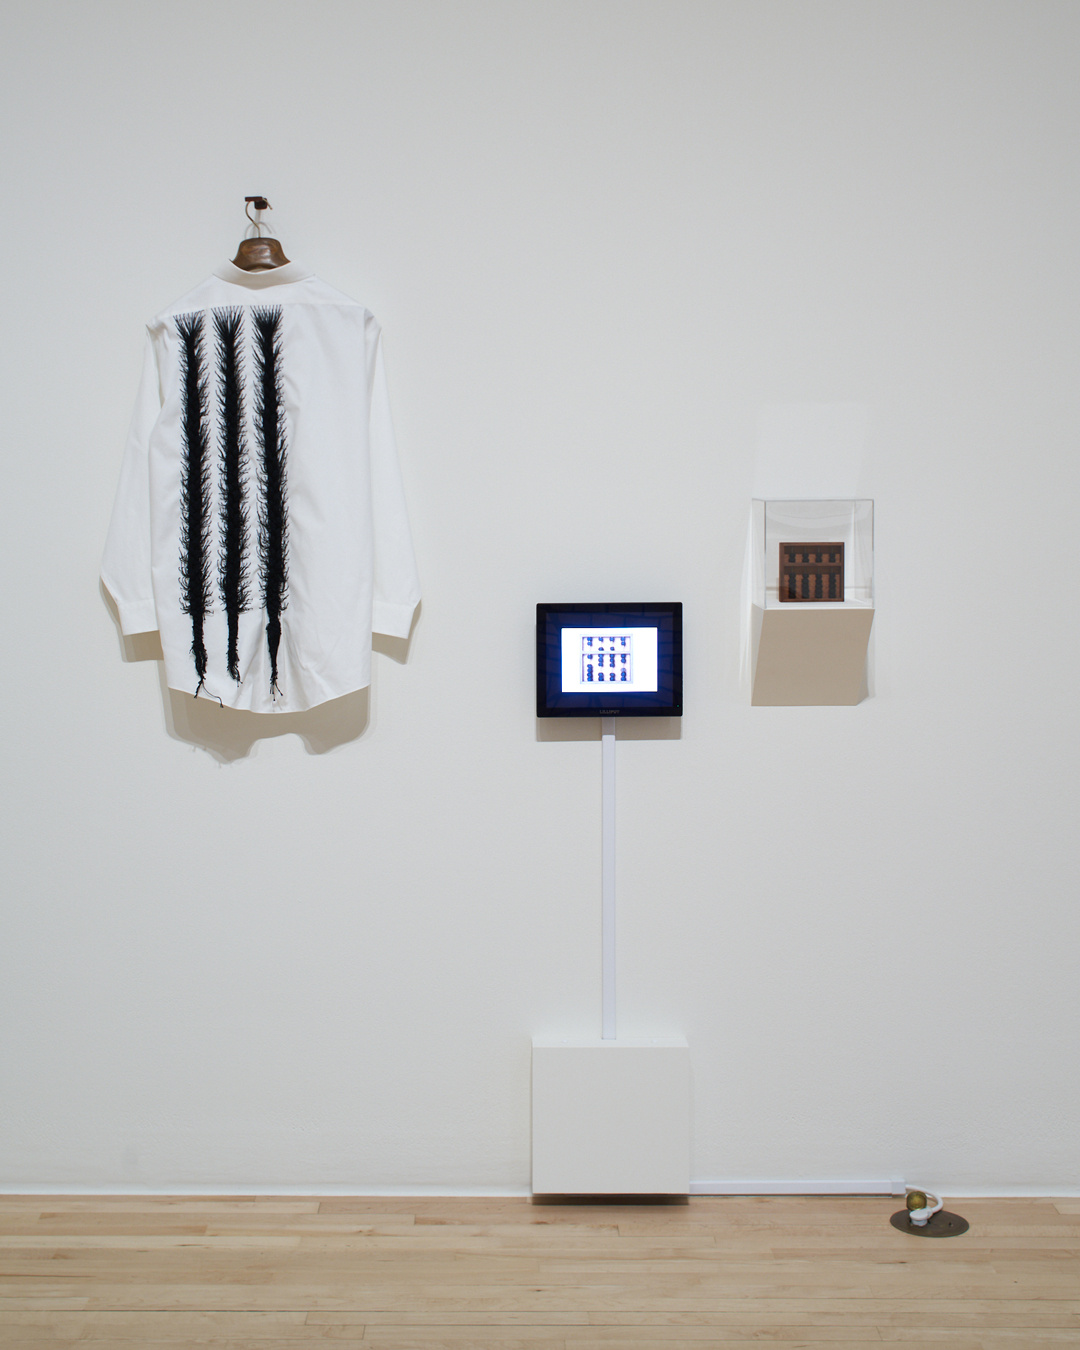 An off-white wall displays a long-sleeved white shirt, a tablet screen, and a small artwork encased in a plexiglass cube. The shirt has three black, feathered lines on its left side that extends vertically from the shoulders down to the bottom.